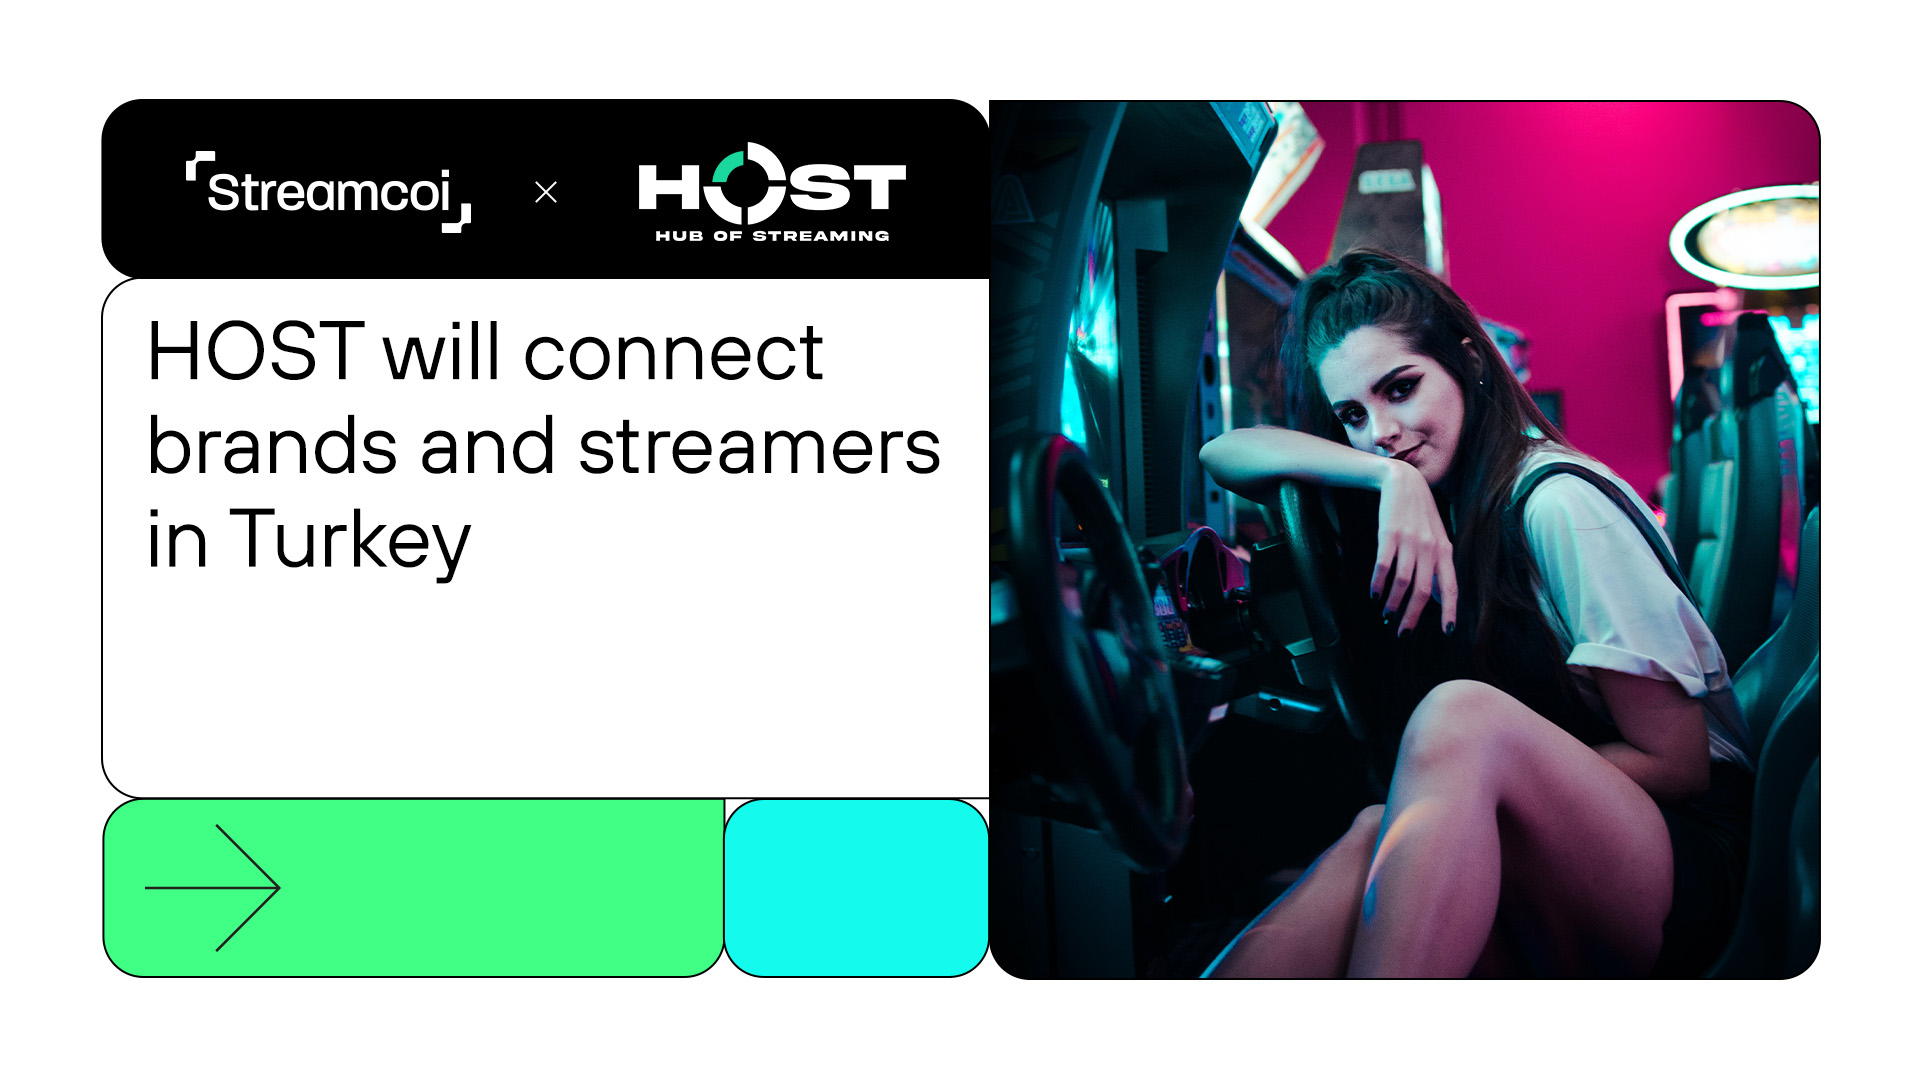 Hub of Streaming launches to connect brands and streamers in Turkey